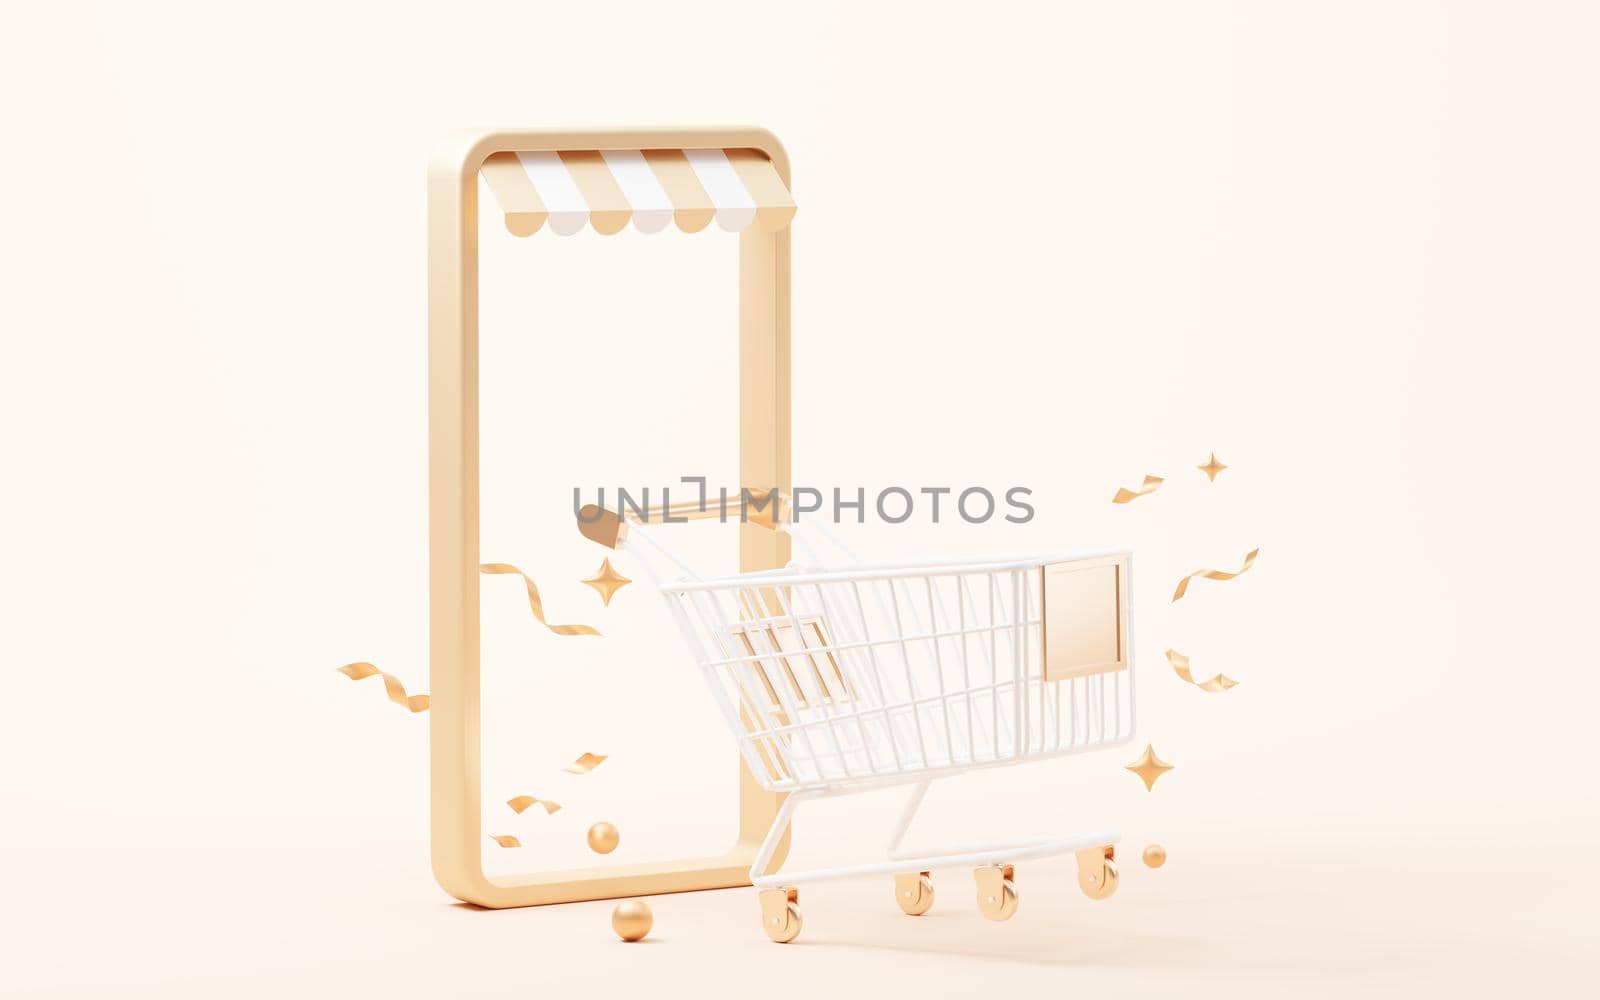 Shopping cart with gift boxes, 3d rendering. Computer digital drawing.